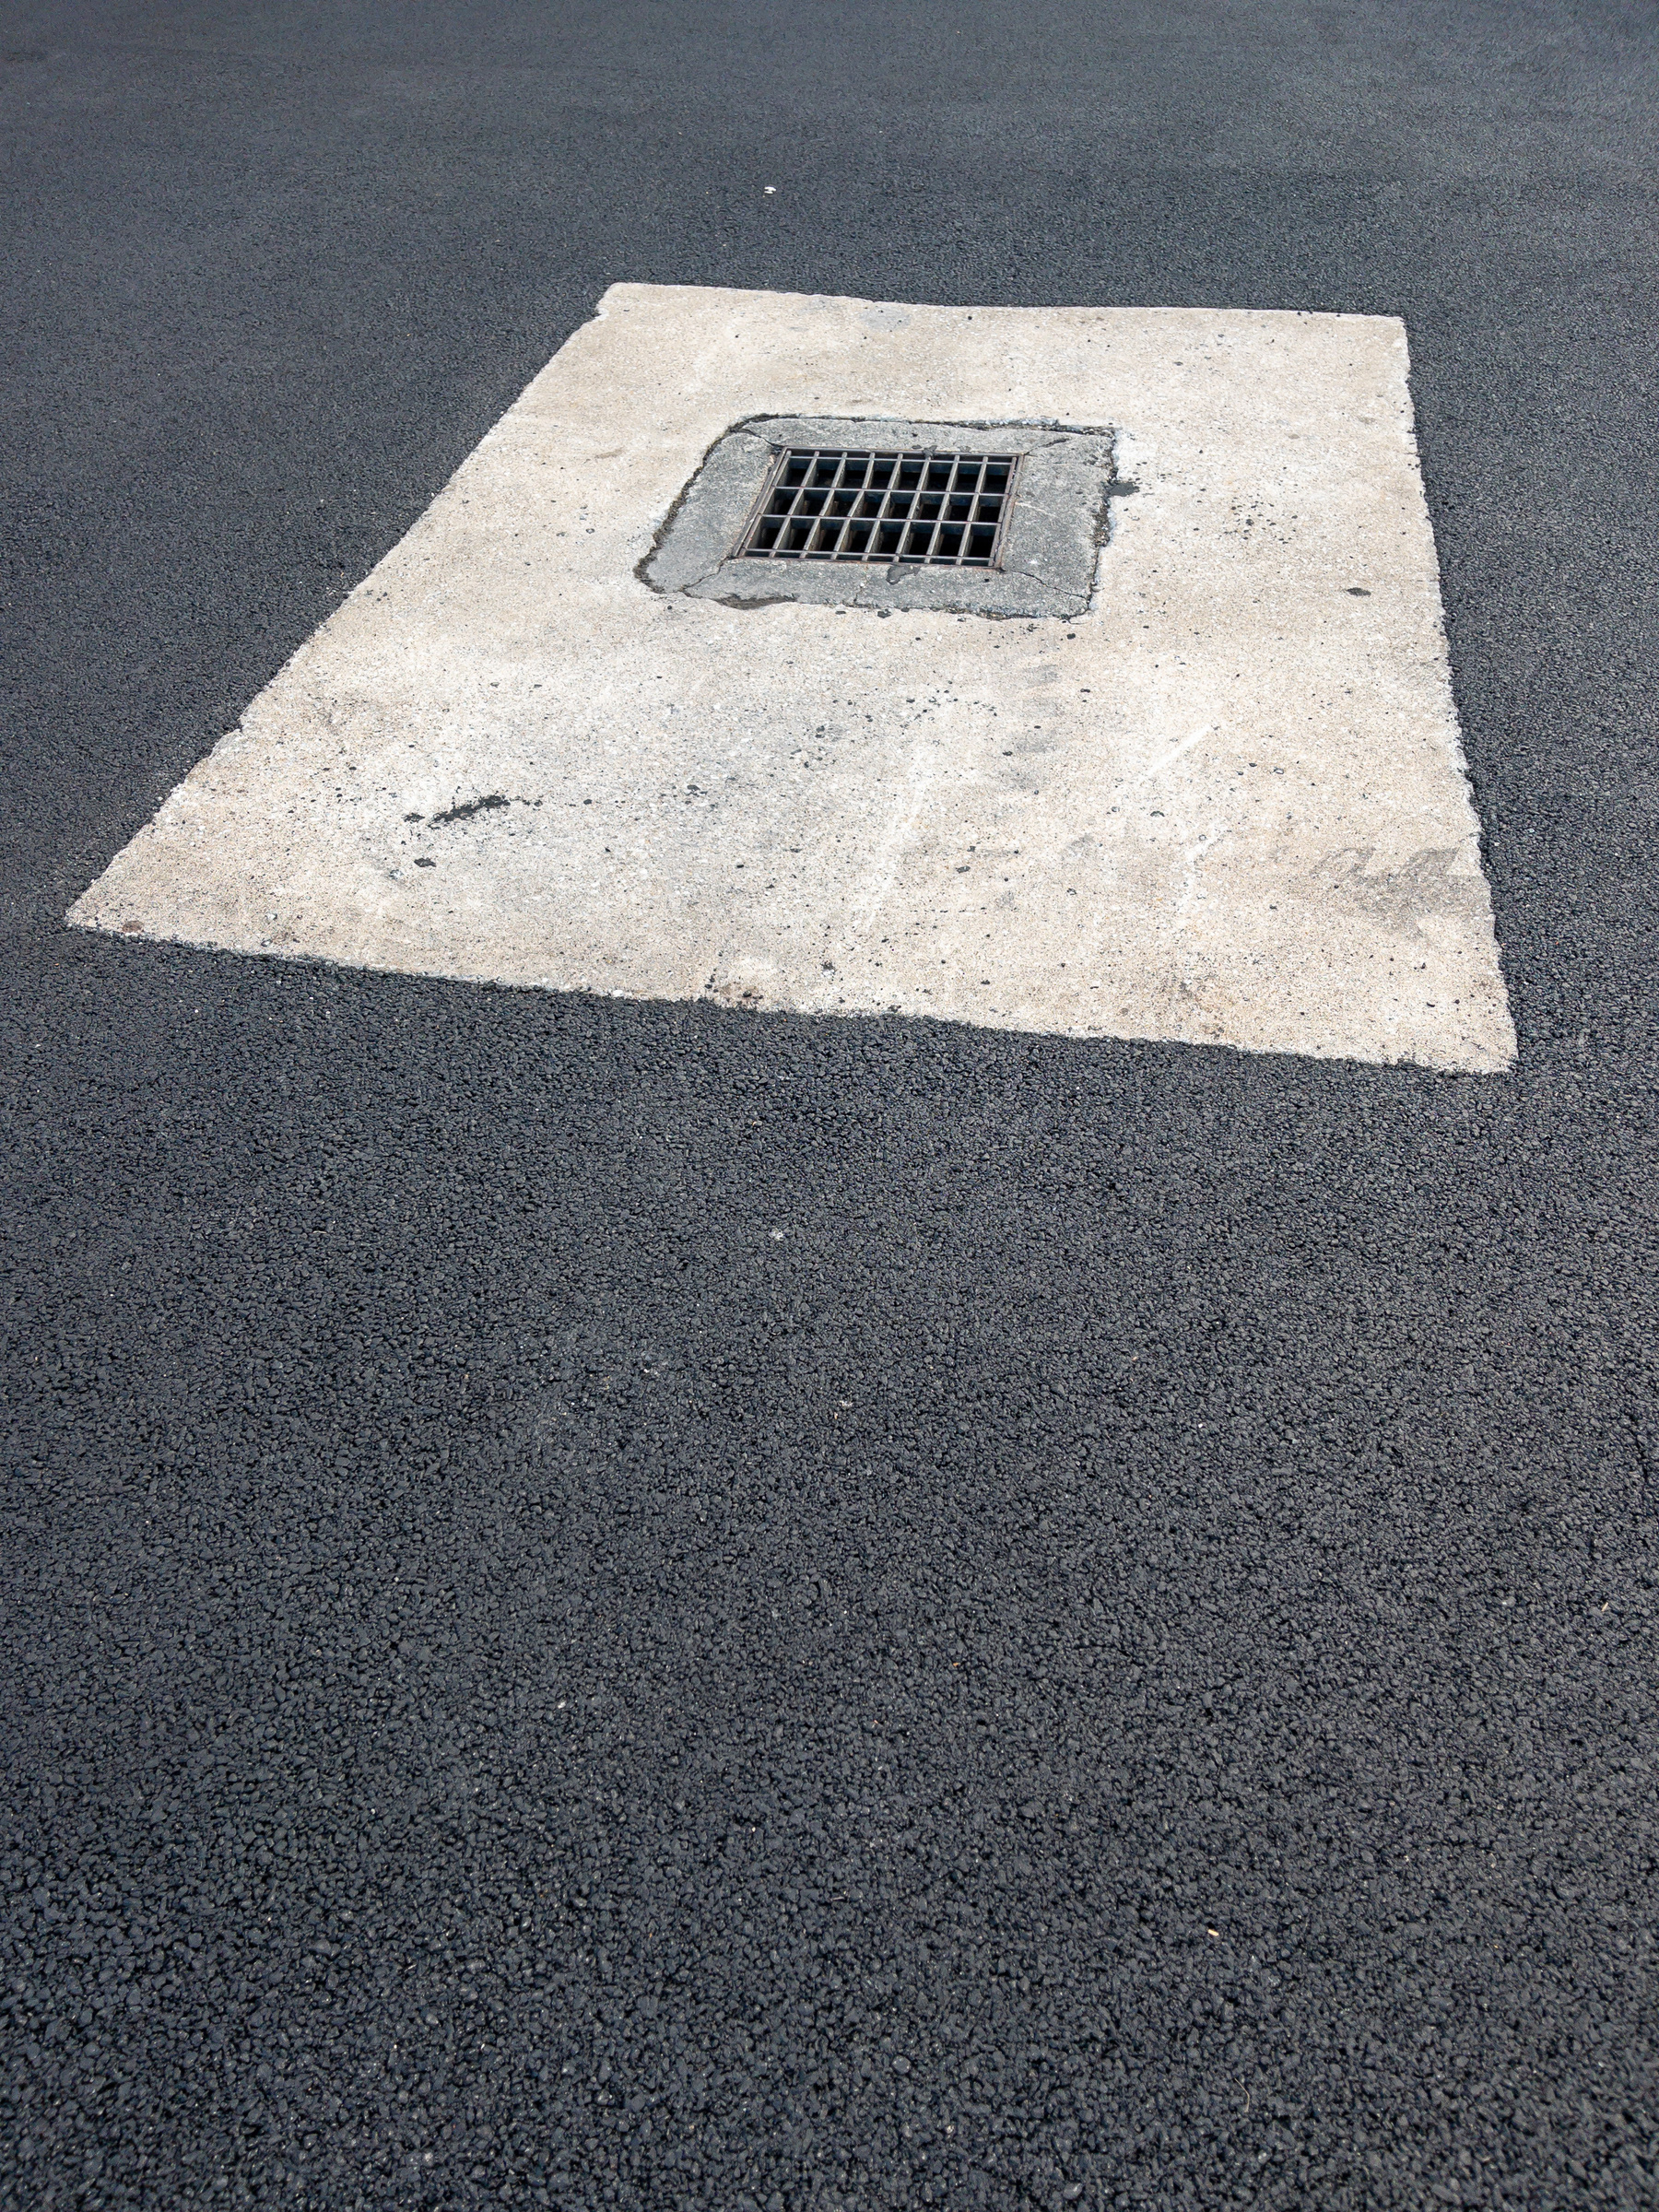 Rectangular concrete slab with drainage basin in the upper left corner surrounded by asphalt paving. Rectangle rotated to the right in the rectangular frame.